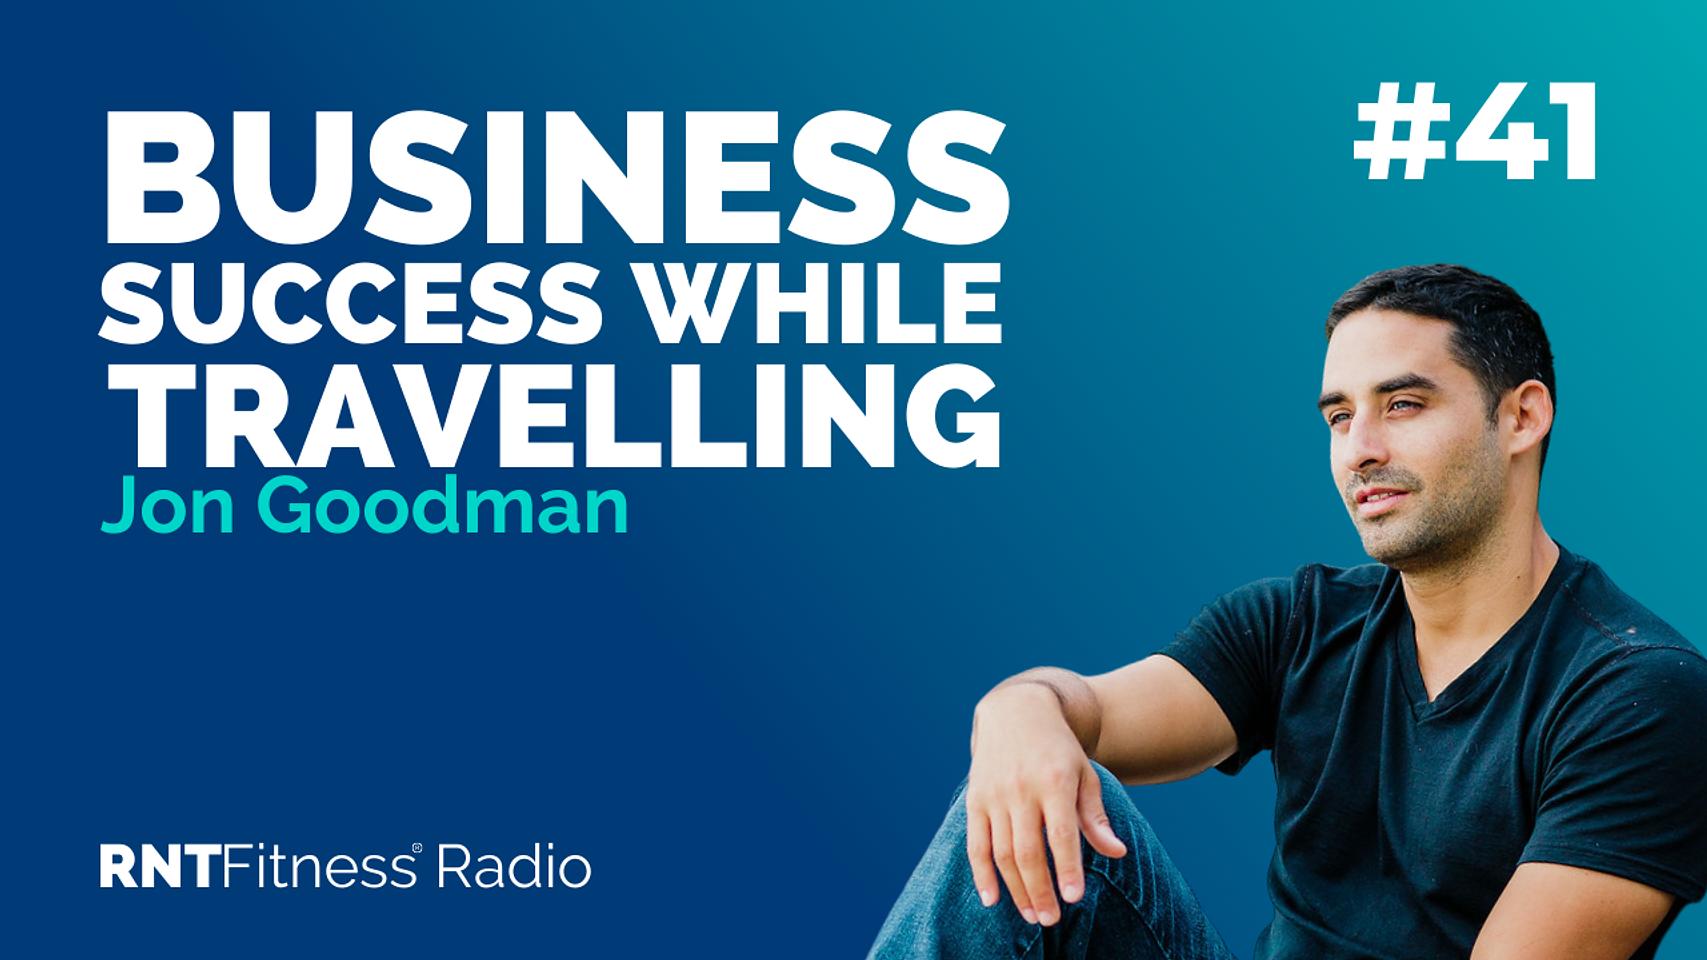 Ep. 41 - How To Build A Successful Business While Travelling the World With Your Family w/ Jon Goodman